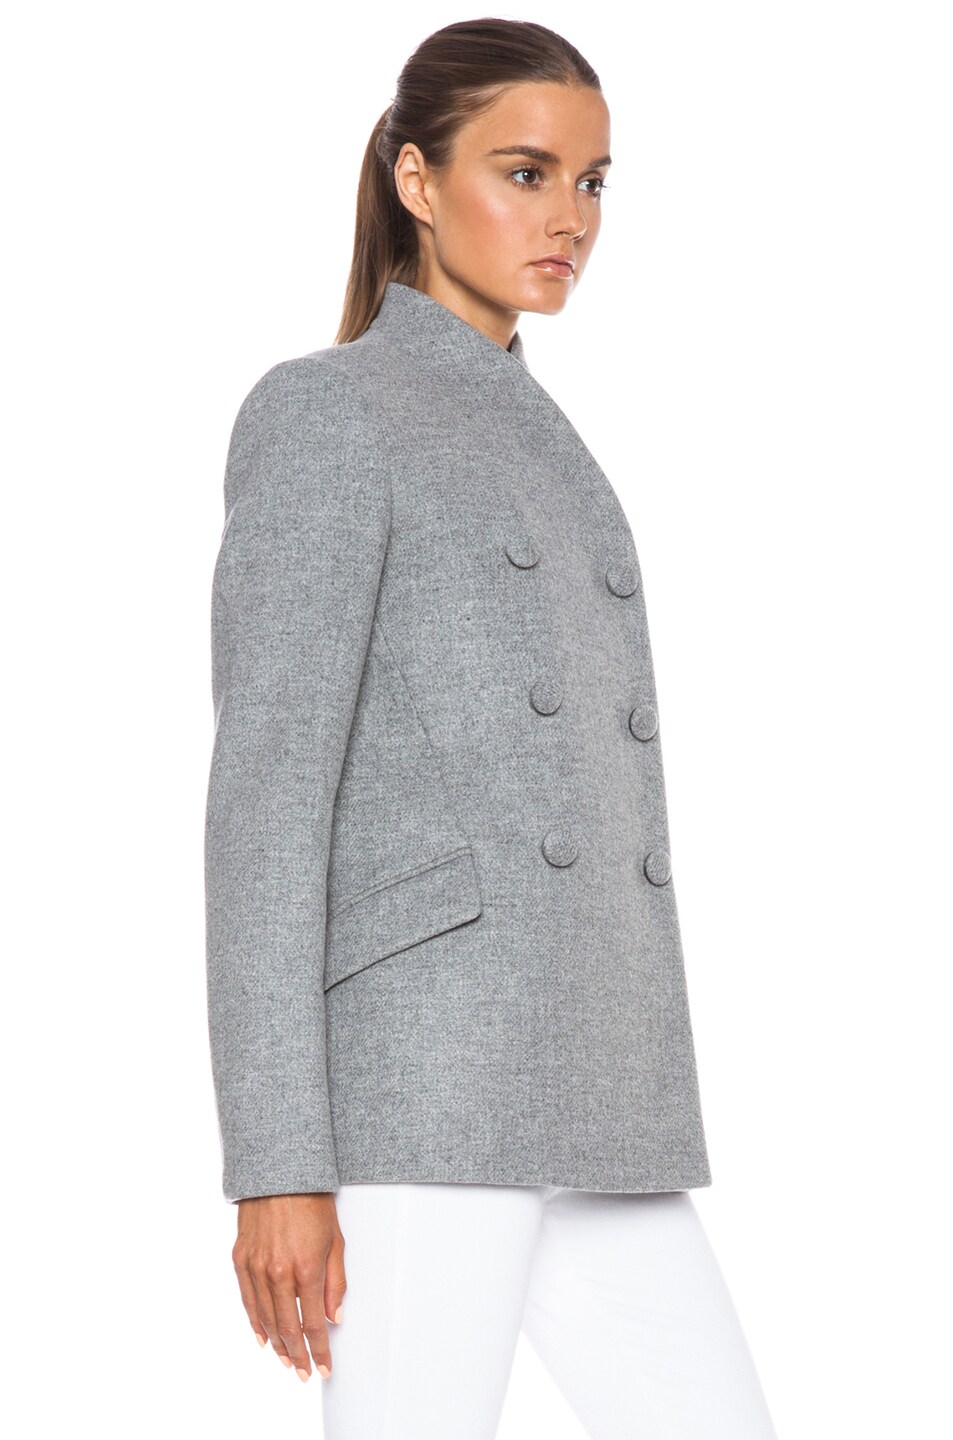 Proenza Schouler Wool Cashmere Double Breasted Jacket in Grey | FWRD